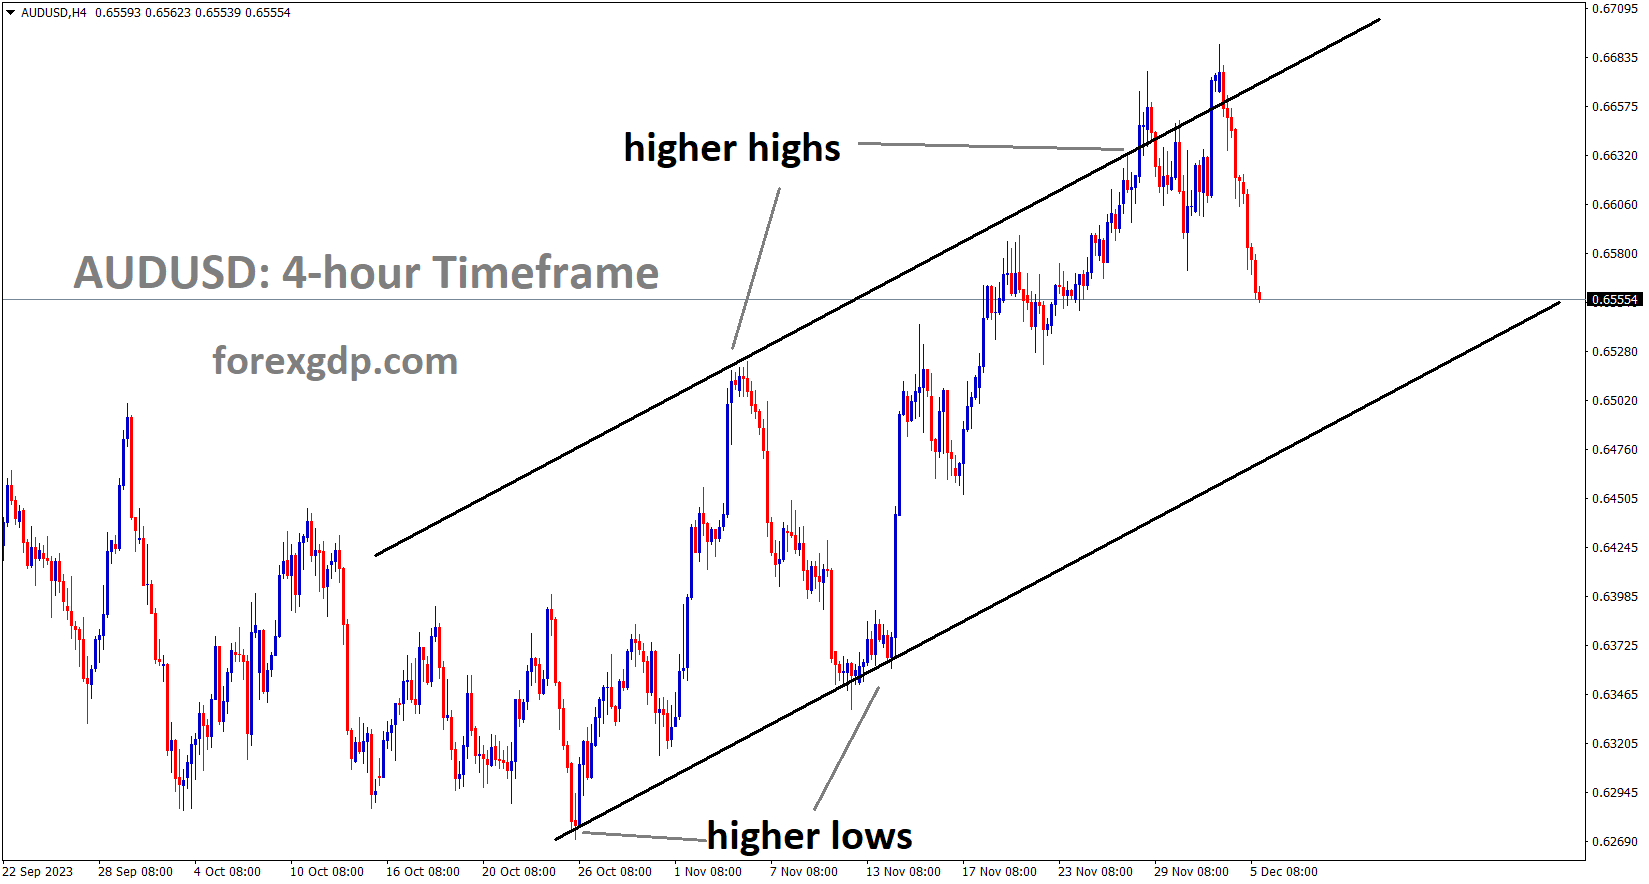 AUDUSD is moving in a ascending channel and the market has fallen from the higher high area of the channel